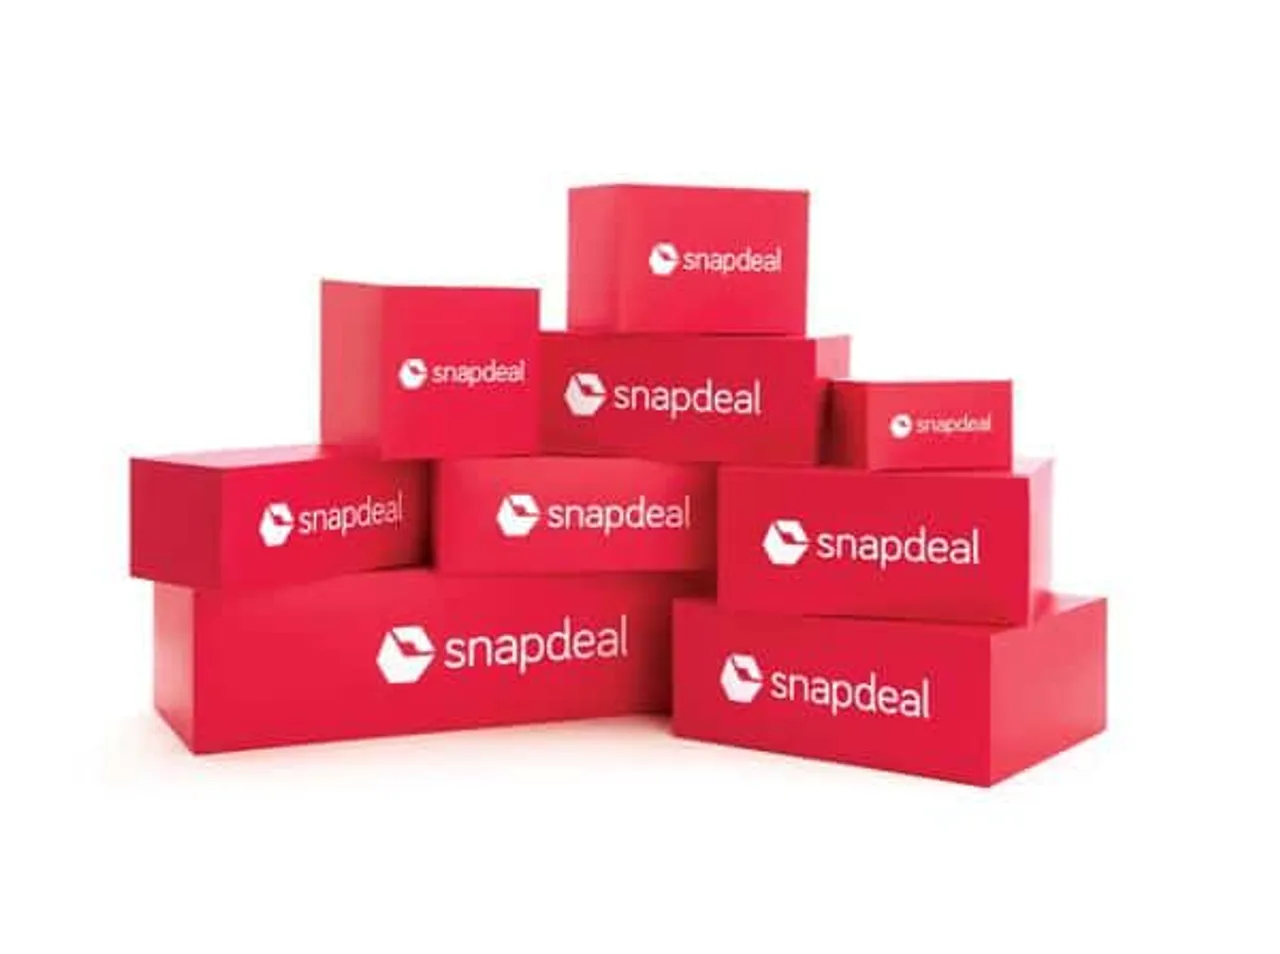 snapdeal launches fastest next day delivery to cover pin codes